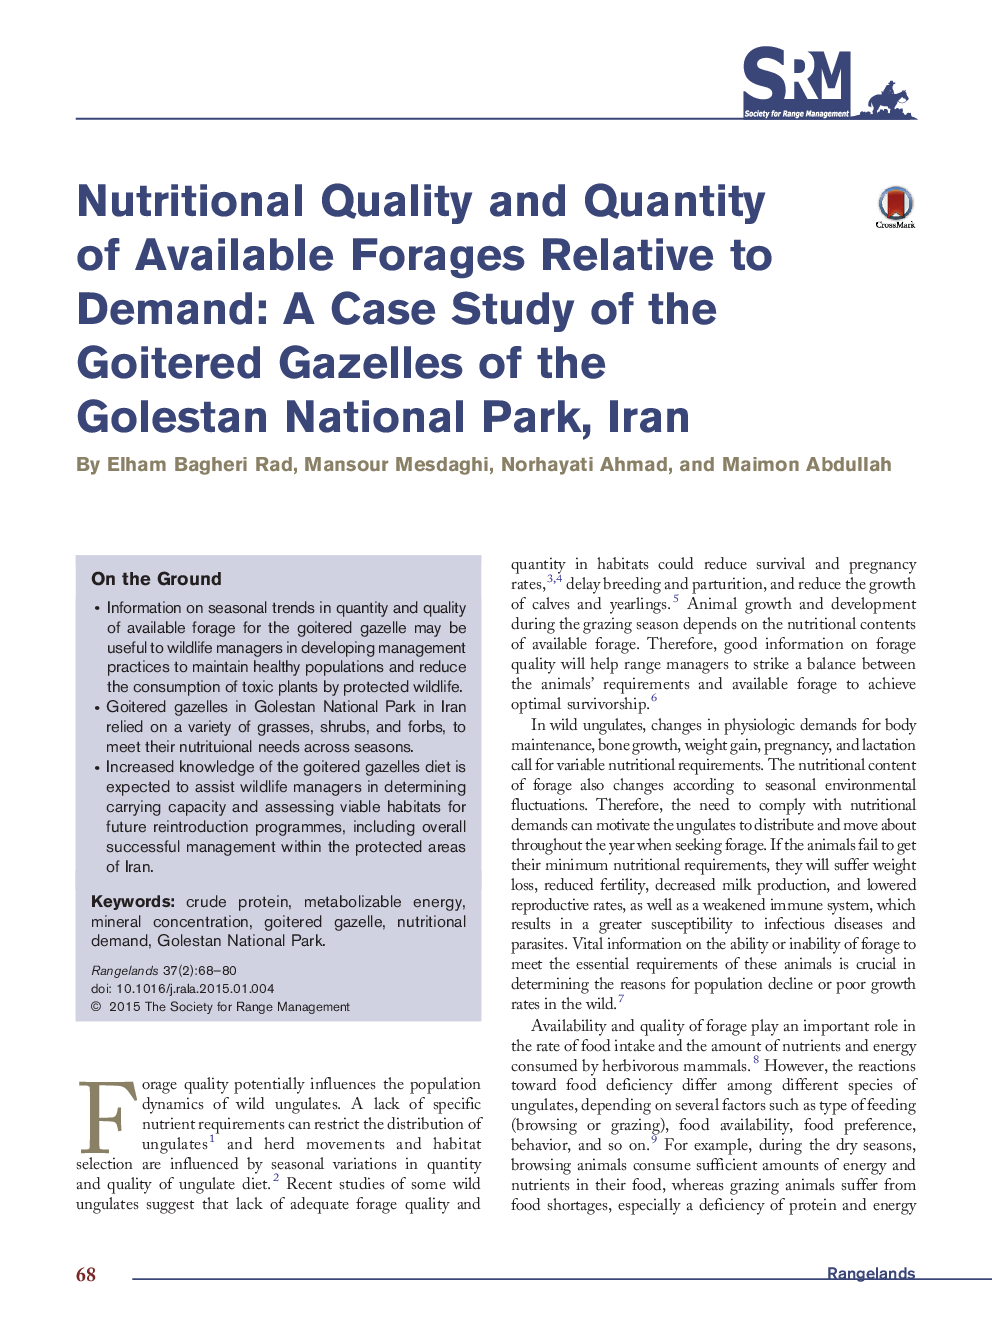 Nutritional Quality and Quantity of Available Forages Relative to Demand: A Case Study of the Goitered Gazelles of the Golestan National Park, Iran